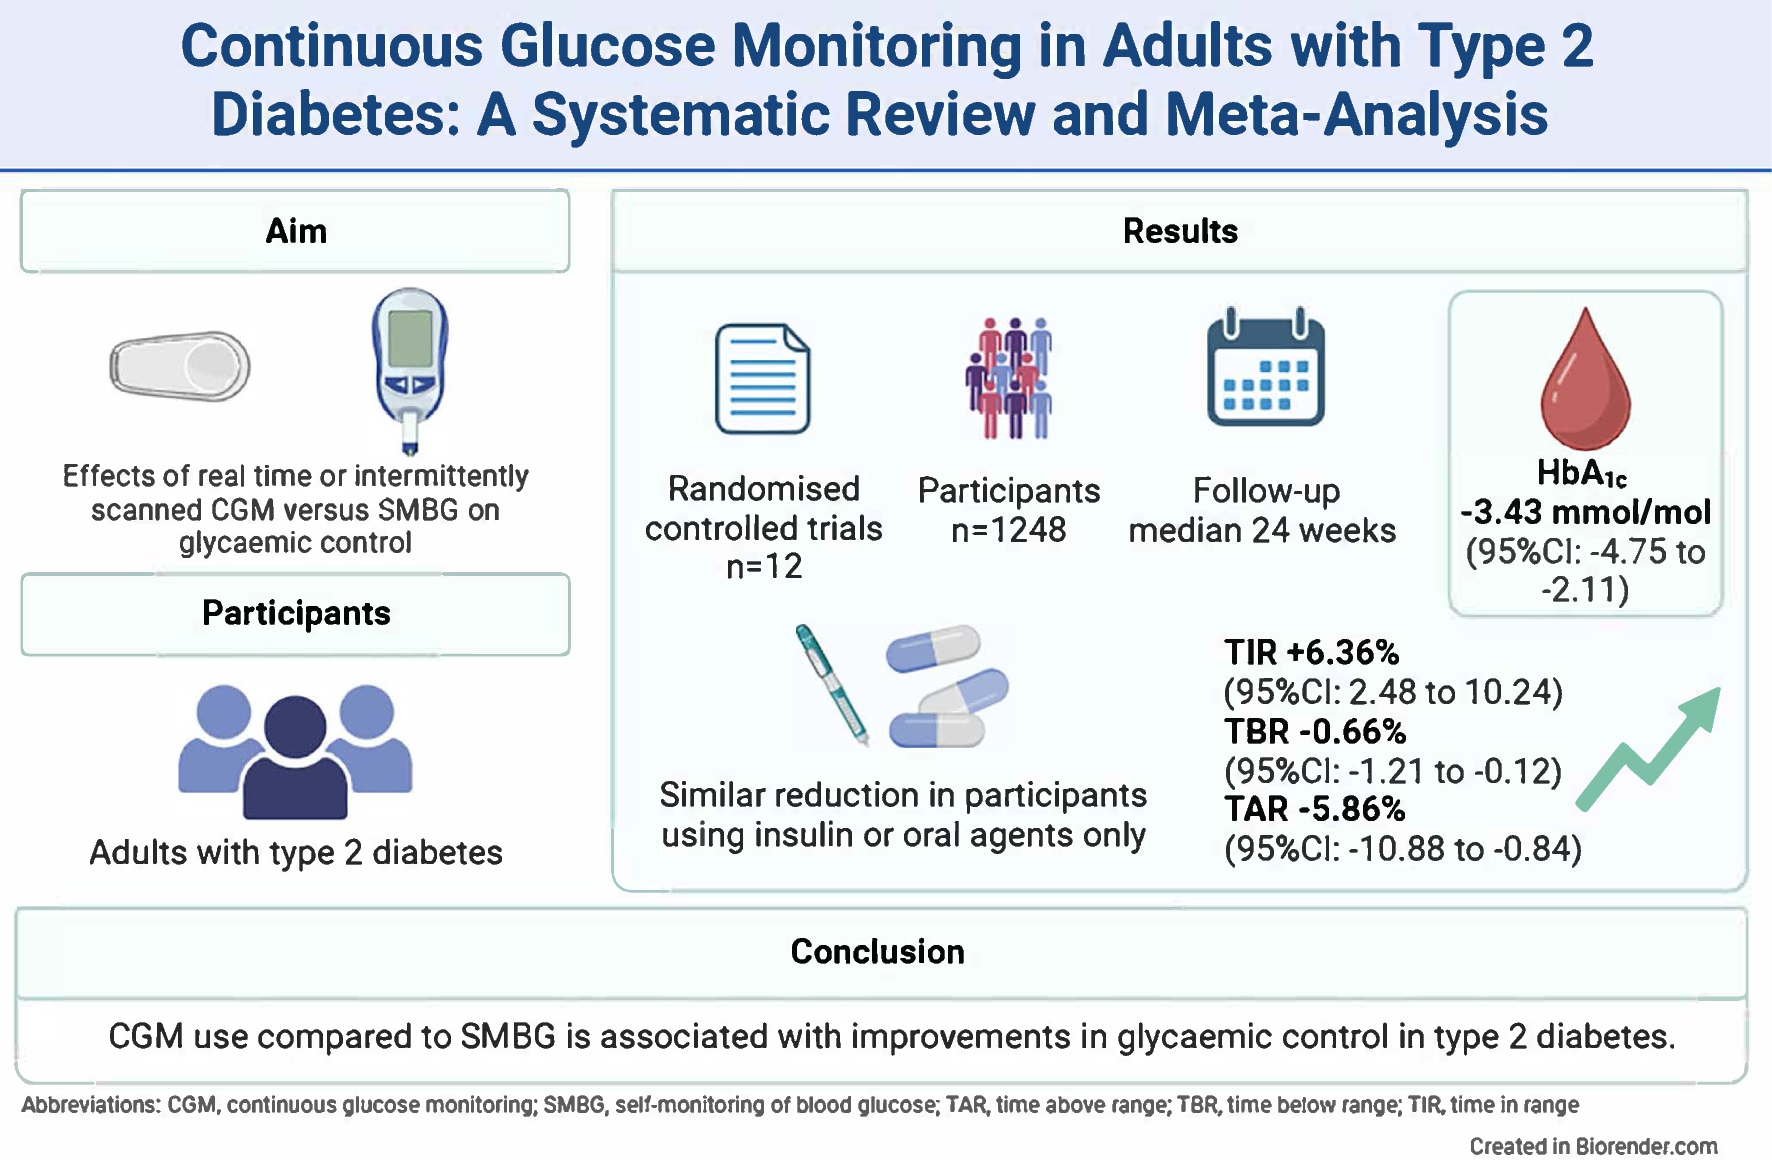 Continuous glucose monitoring in adults with type 2 diabetes: a systematic review and meta-analysis